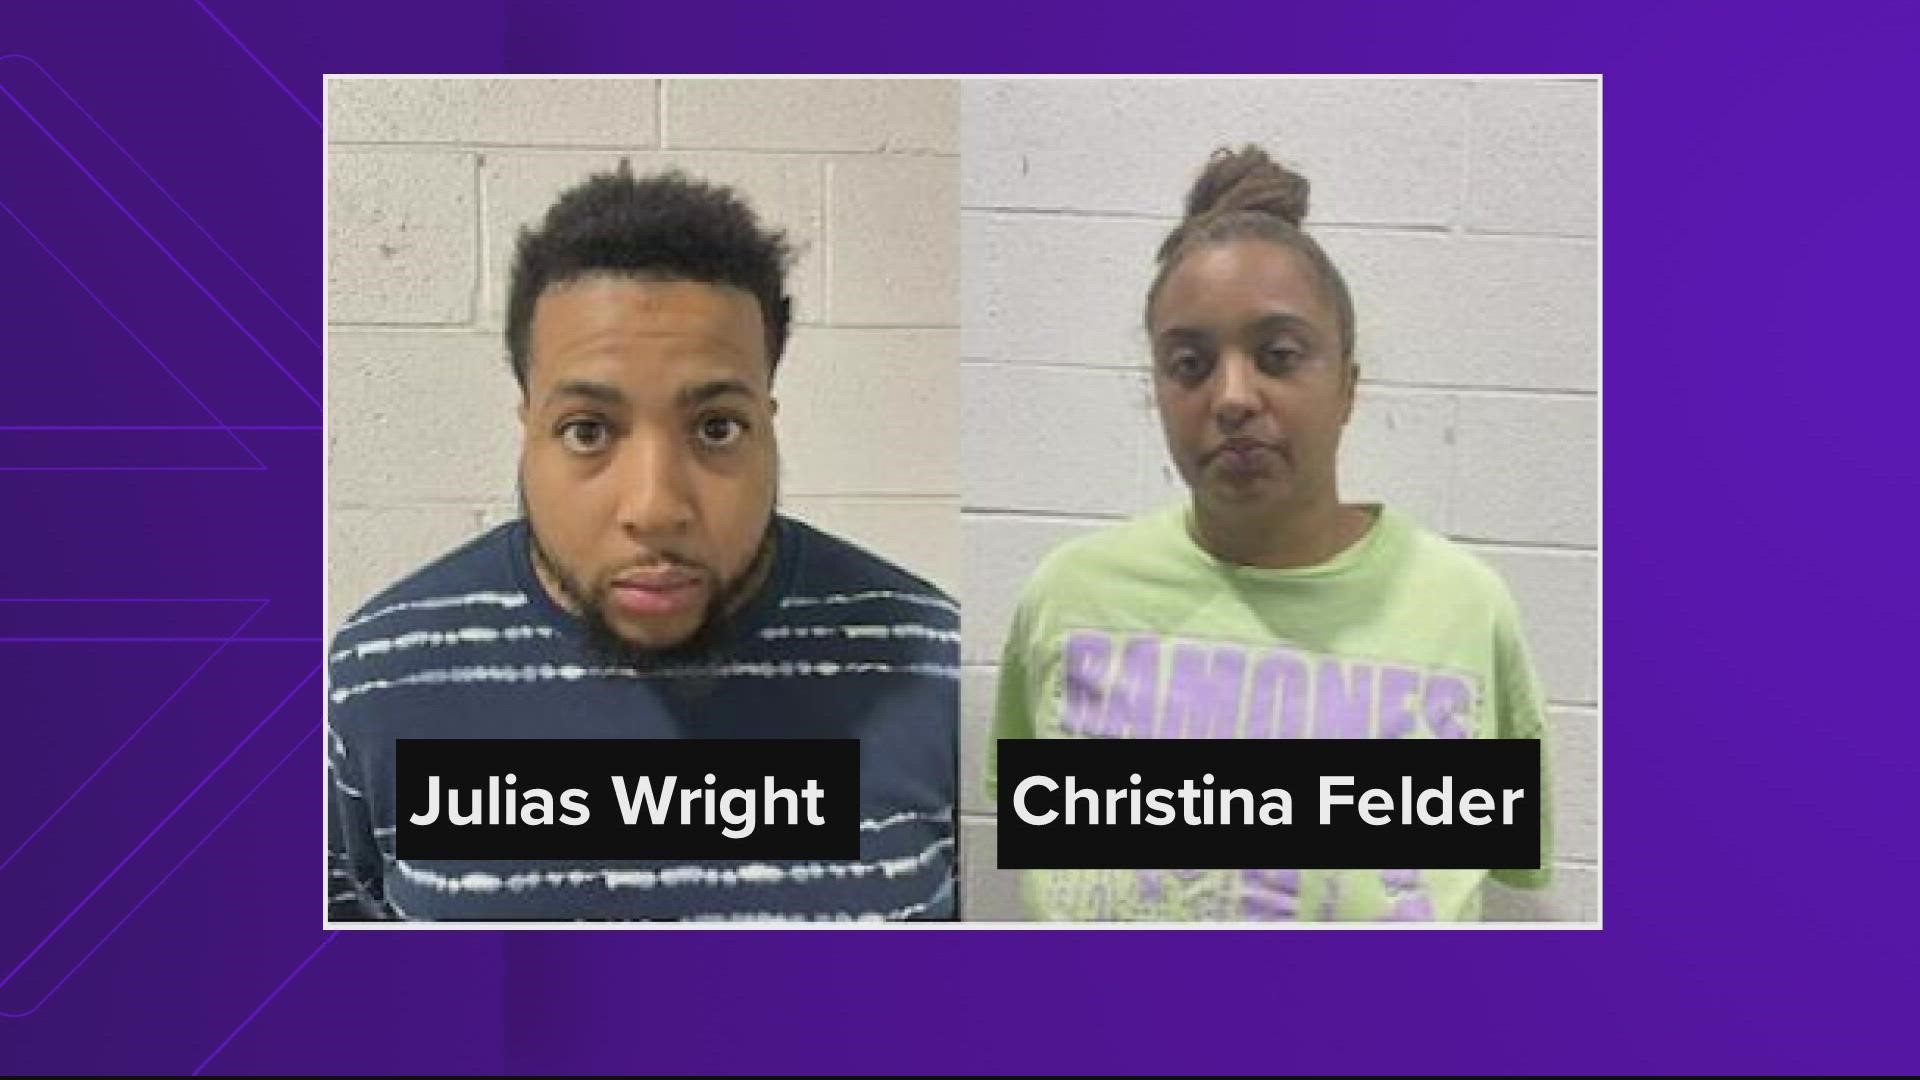 Julius Wright and Christina Felder are facing multiple charges and are being held without bond.